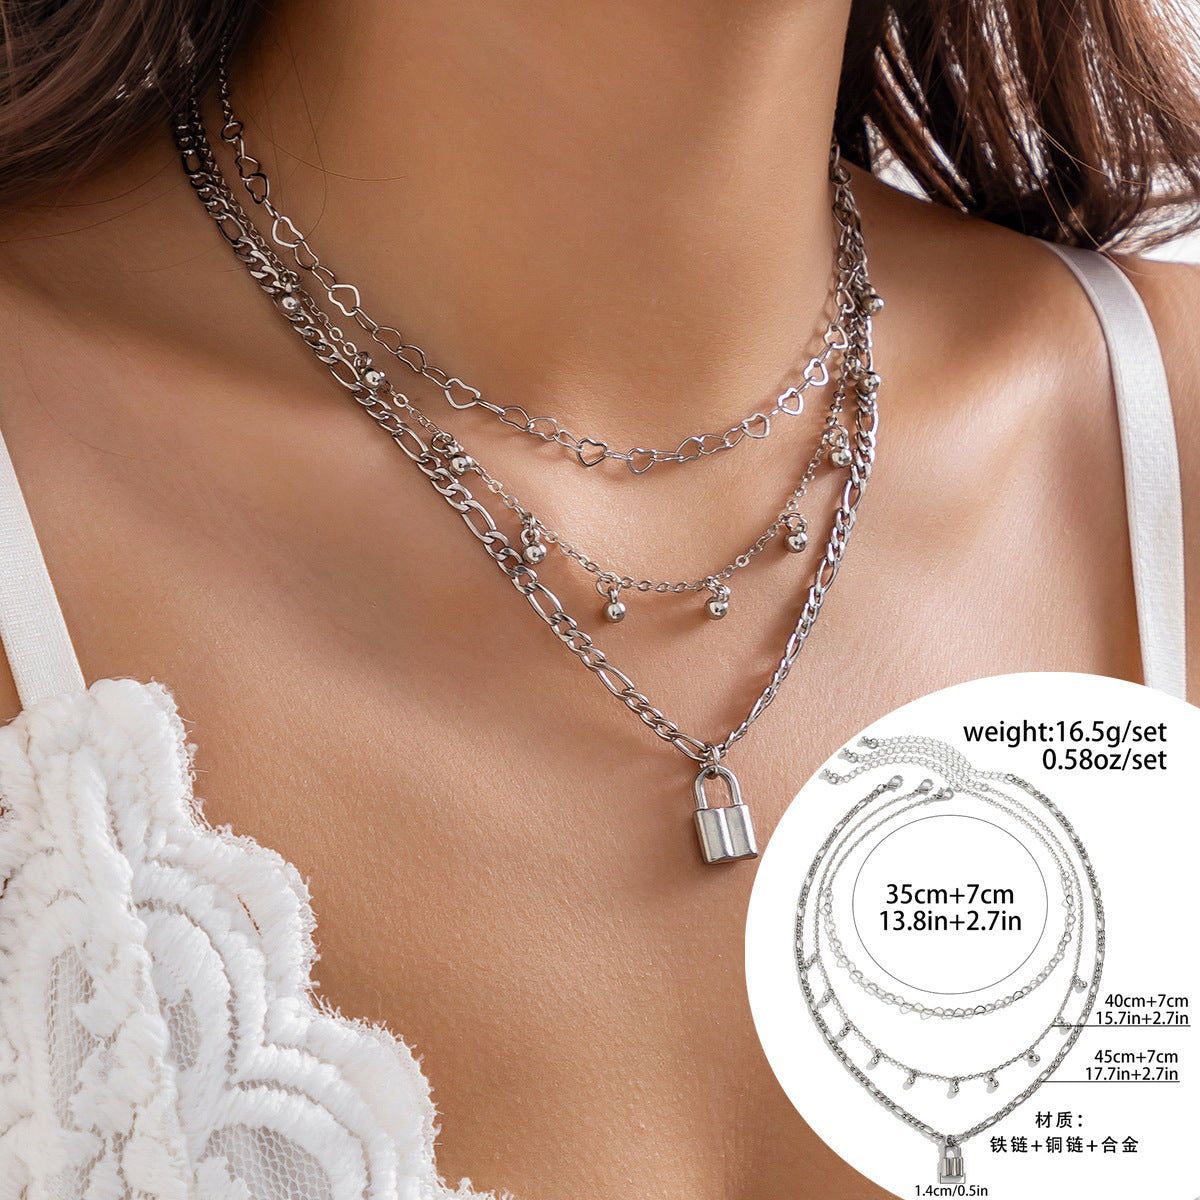 Cross-border Jewelry: Elegant Multi-layered Necklace with Imitation Pearls